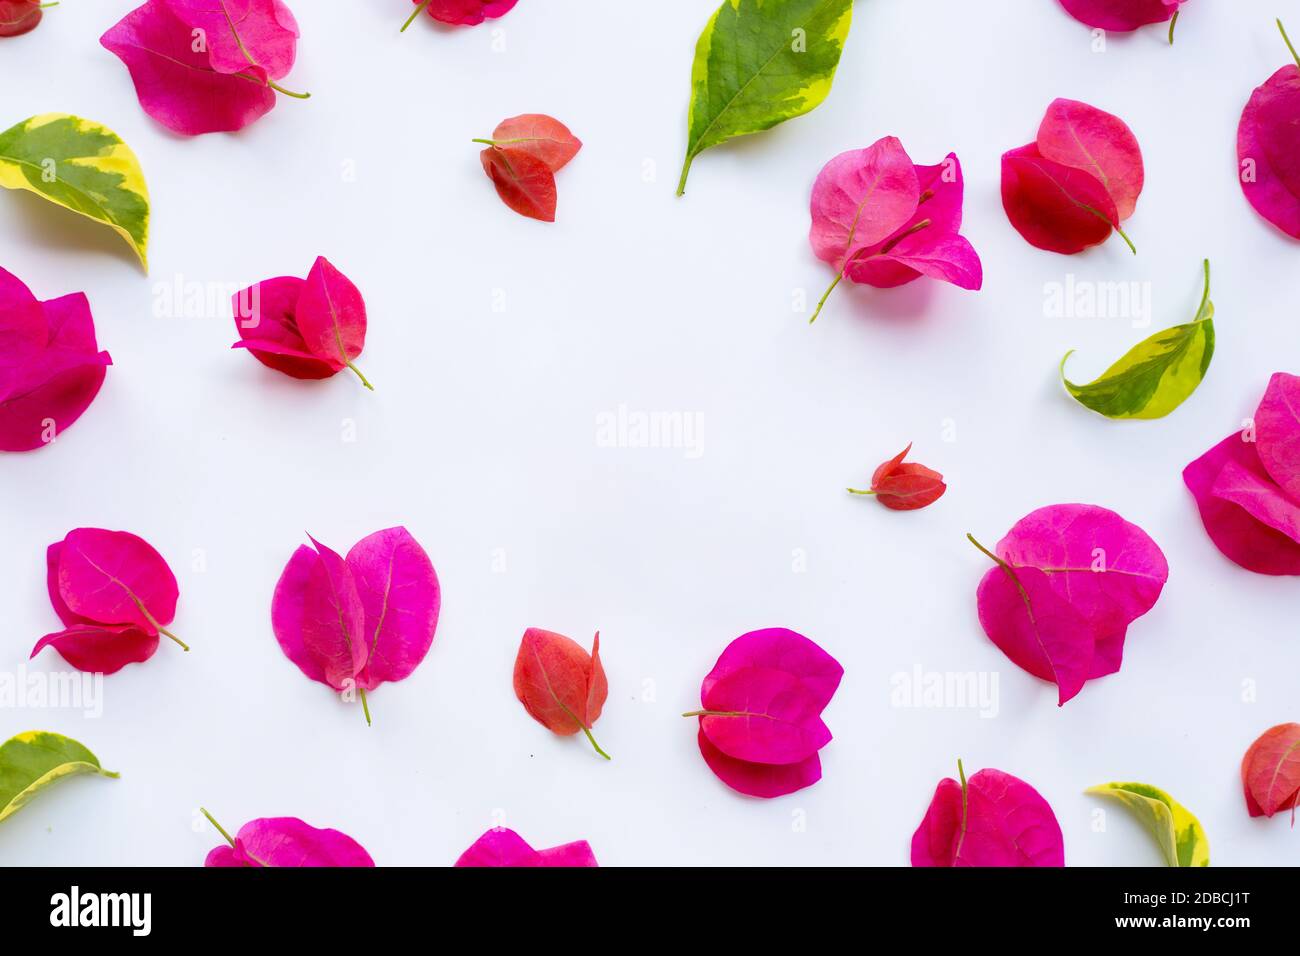 Frme made of beautiful red bougainvillea flower on white background. Stock Photo